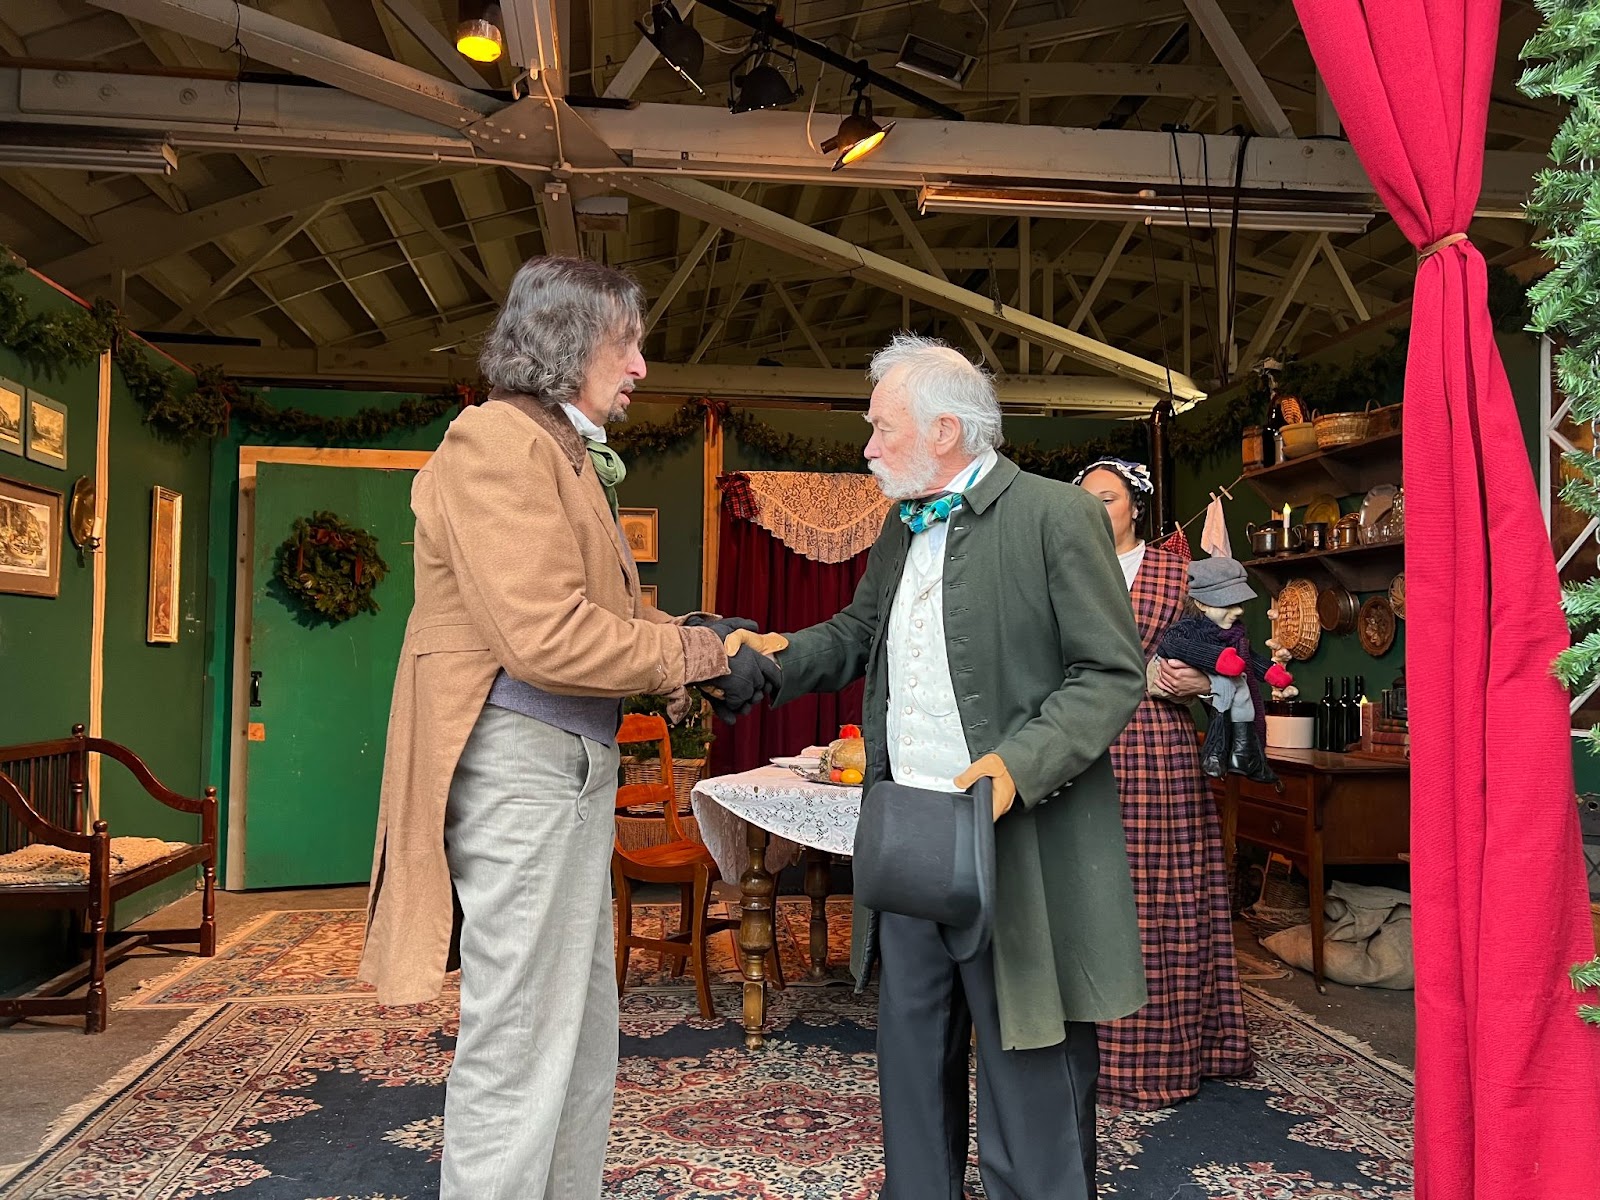 On stage, a man dressed as Dickensian Bob Cratchit shakes hands with another man dressed as Ebenezer Scrooge.